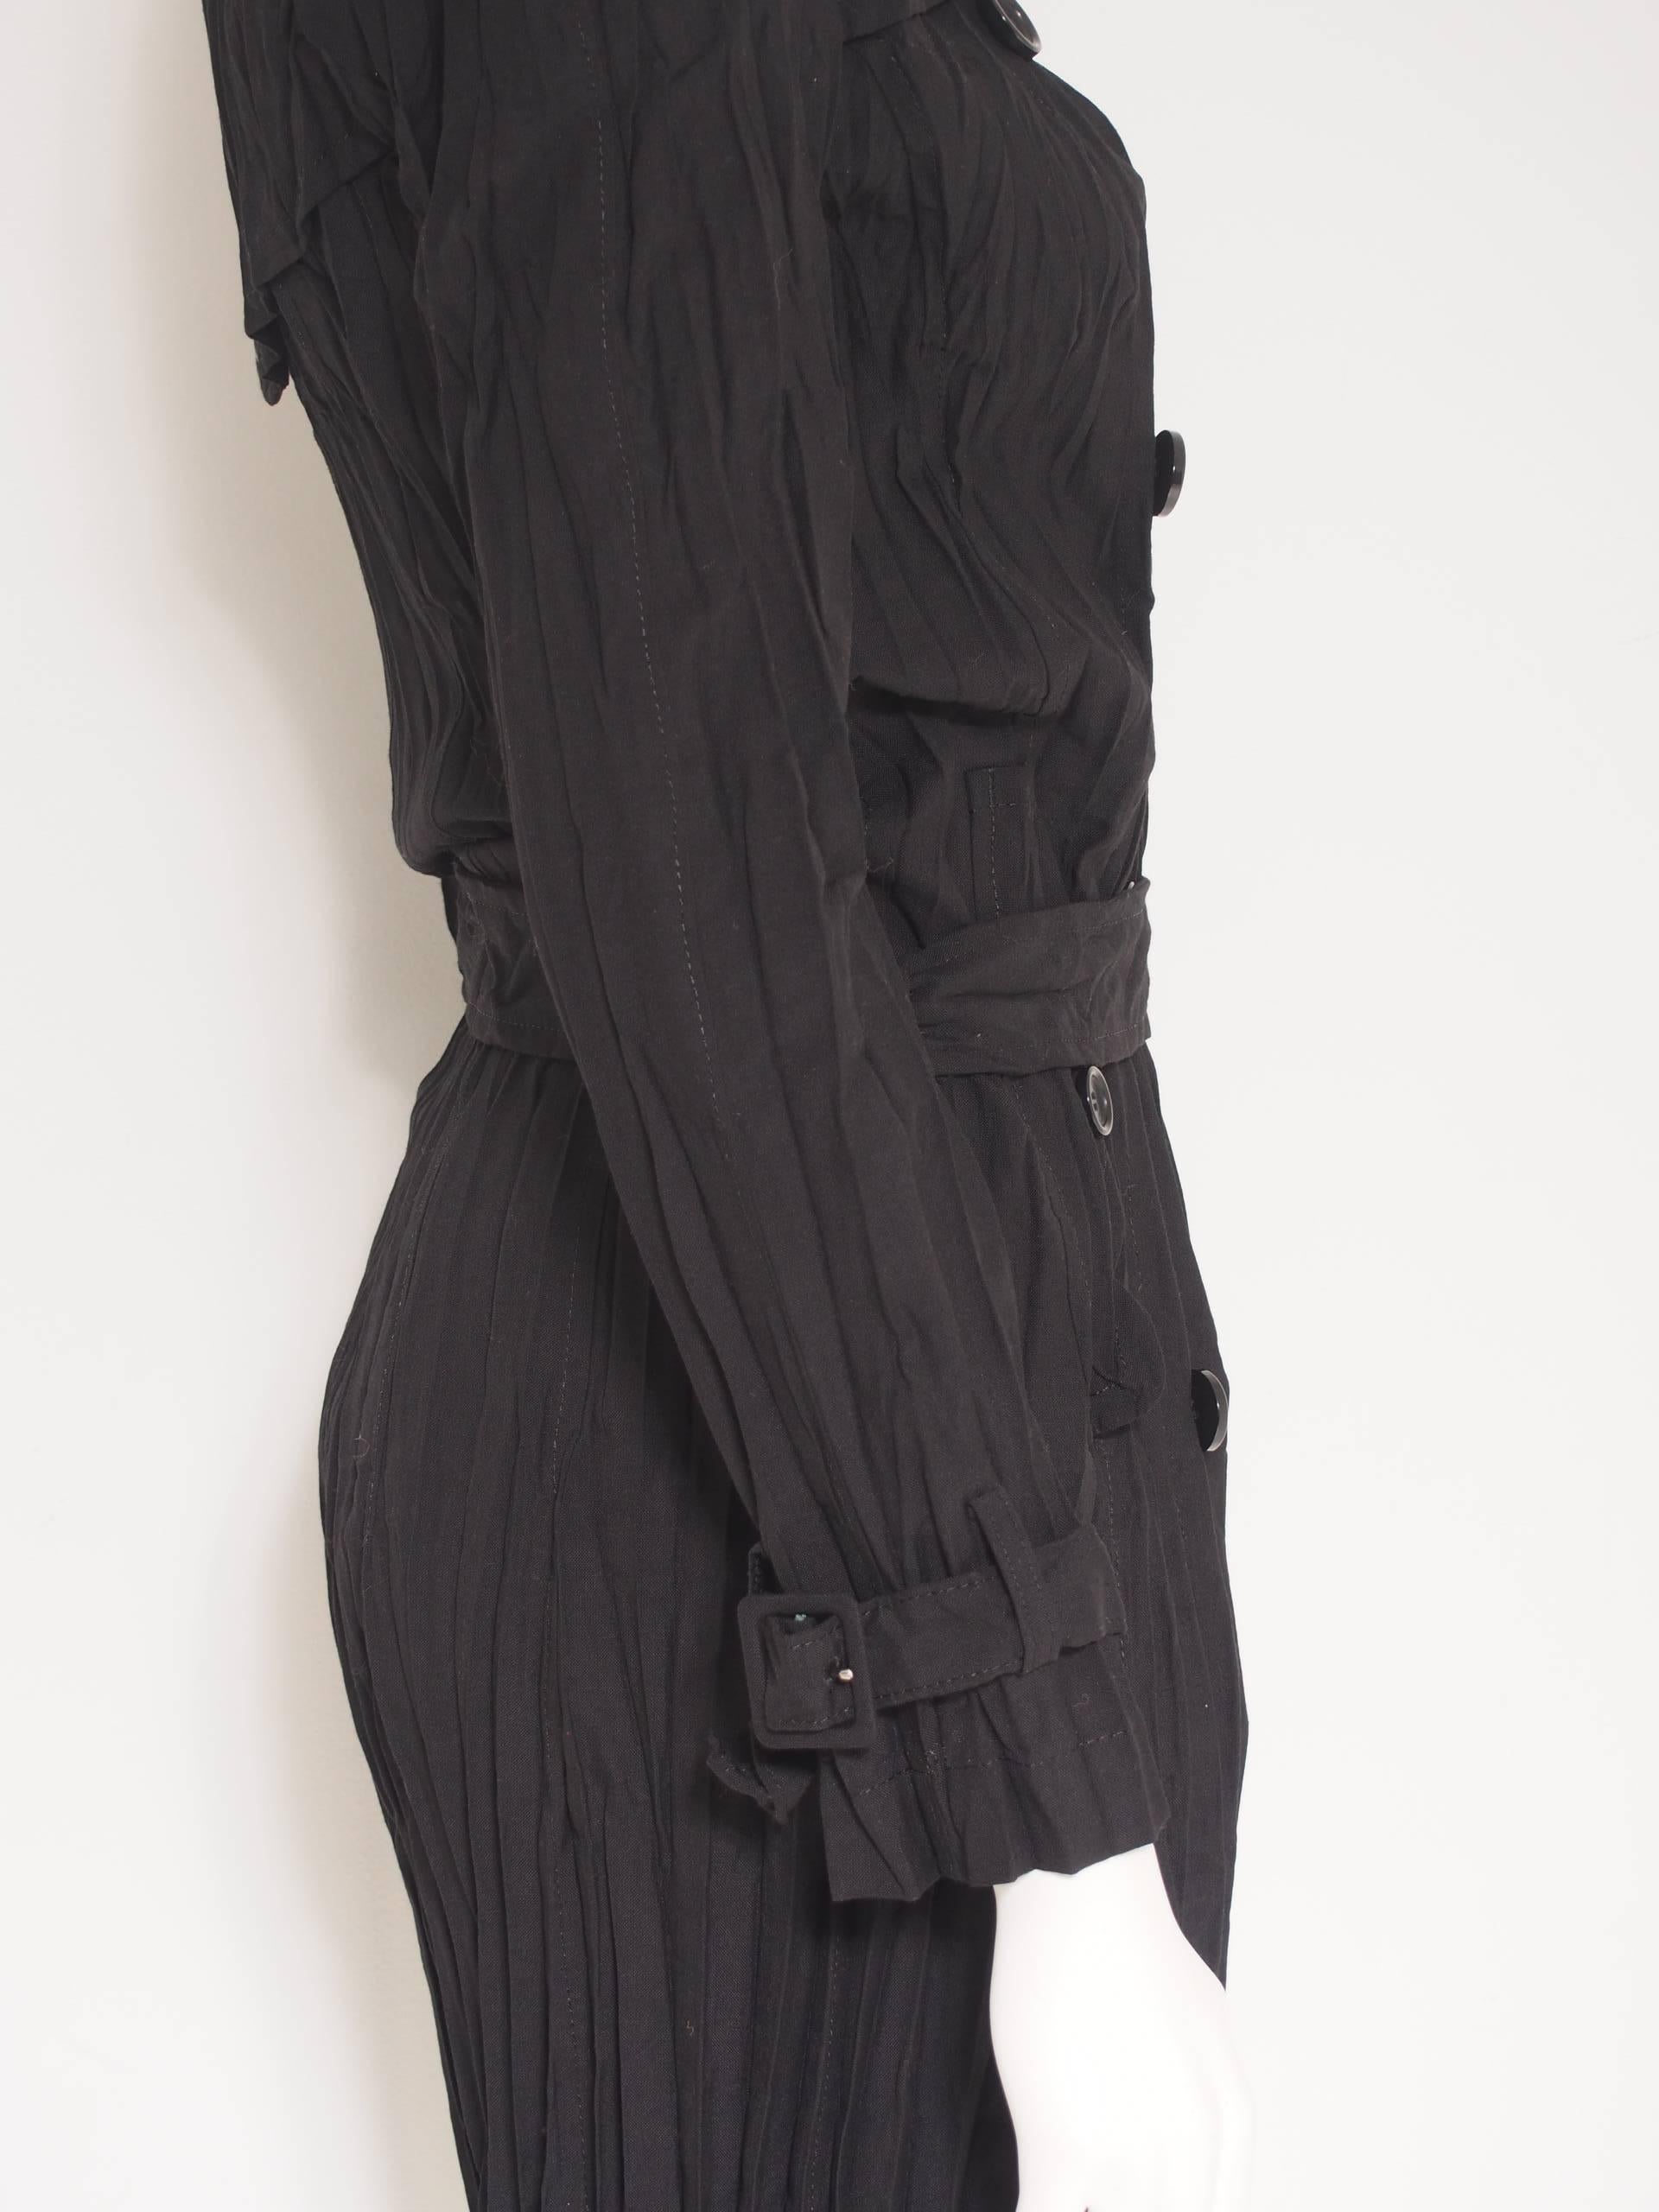 Iconic Junya Watanabe Comme des Garçons fitted, black, belted crinkle jacket with button closure and epaulet details.